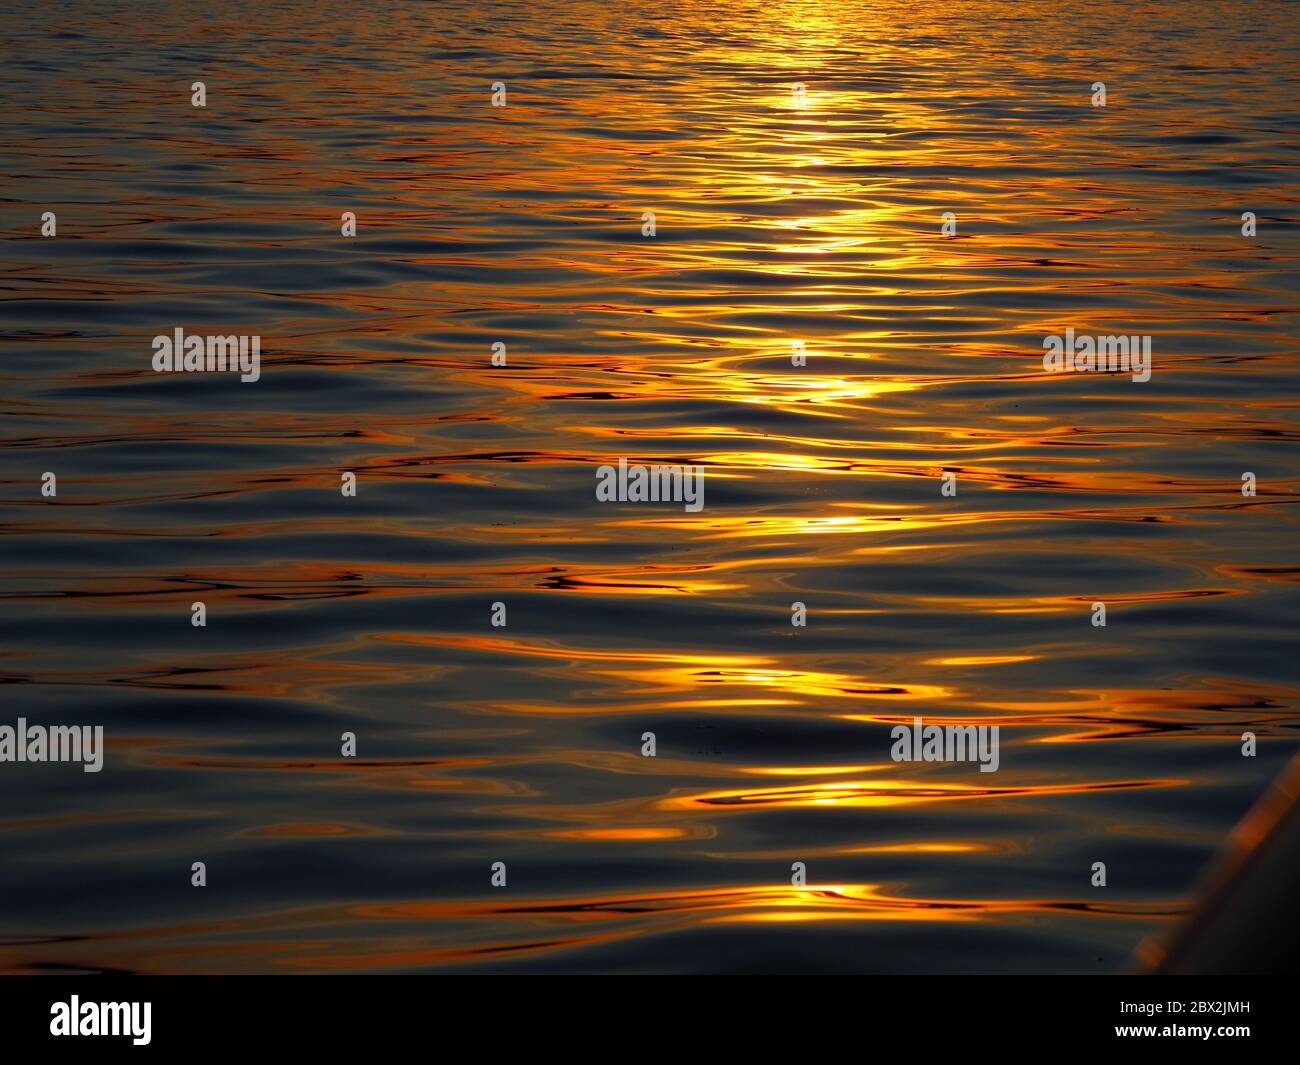 Sunlit Rippled Lake Water Abstract Stock Photo